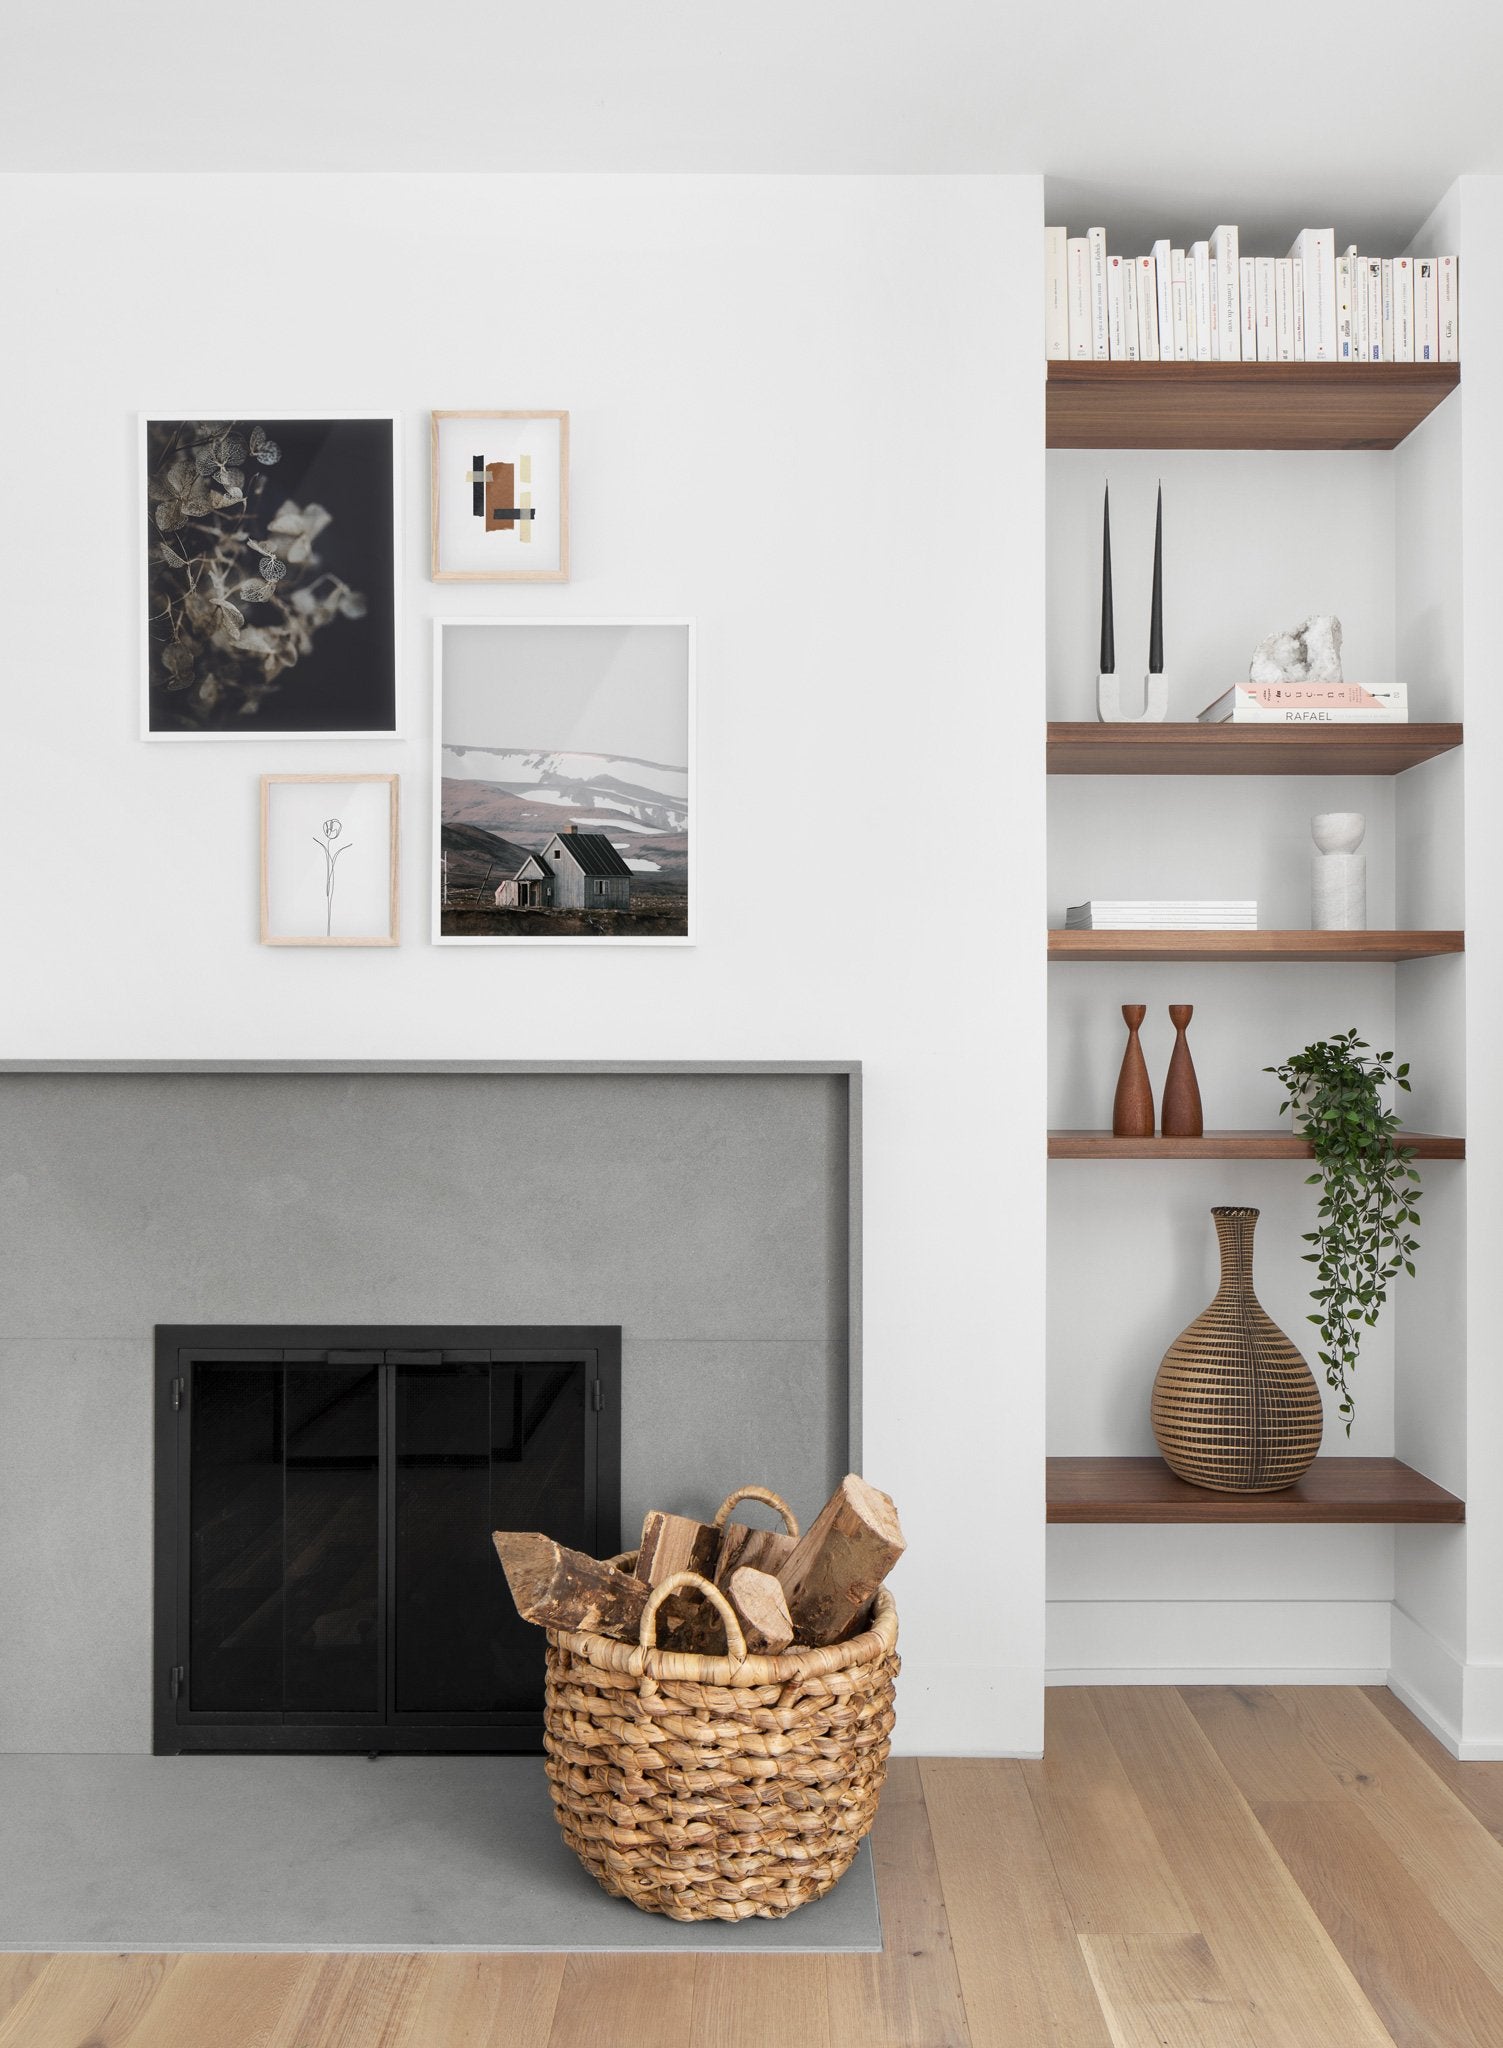 Hydrangea modern minimalist photography poster by Opposite Wall - Living room with fireplace